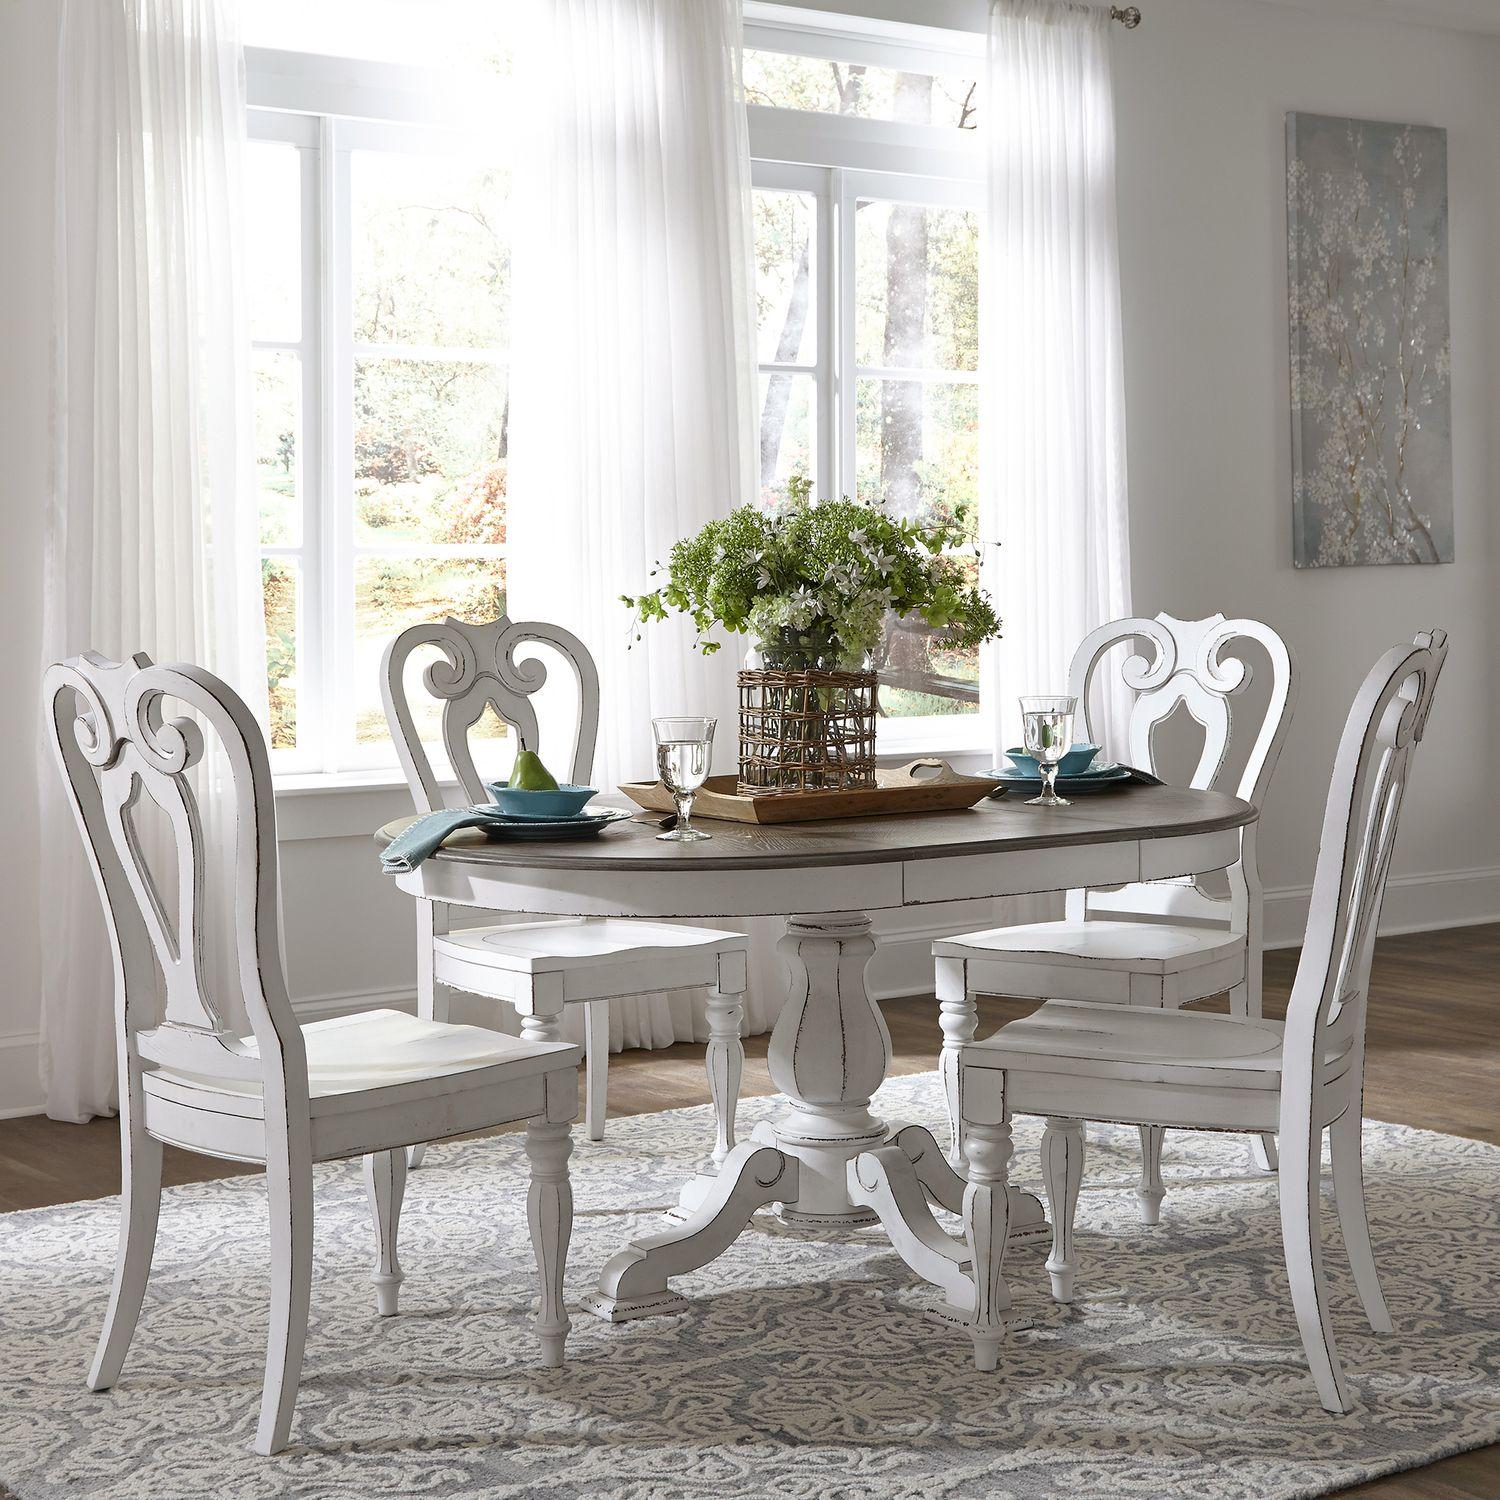 European Traditional Dining Table Set Magnolia Manor  (244-DR) Dining Room Set 244-DR-5PDS in White 